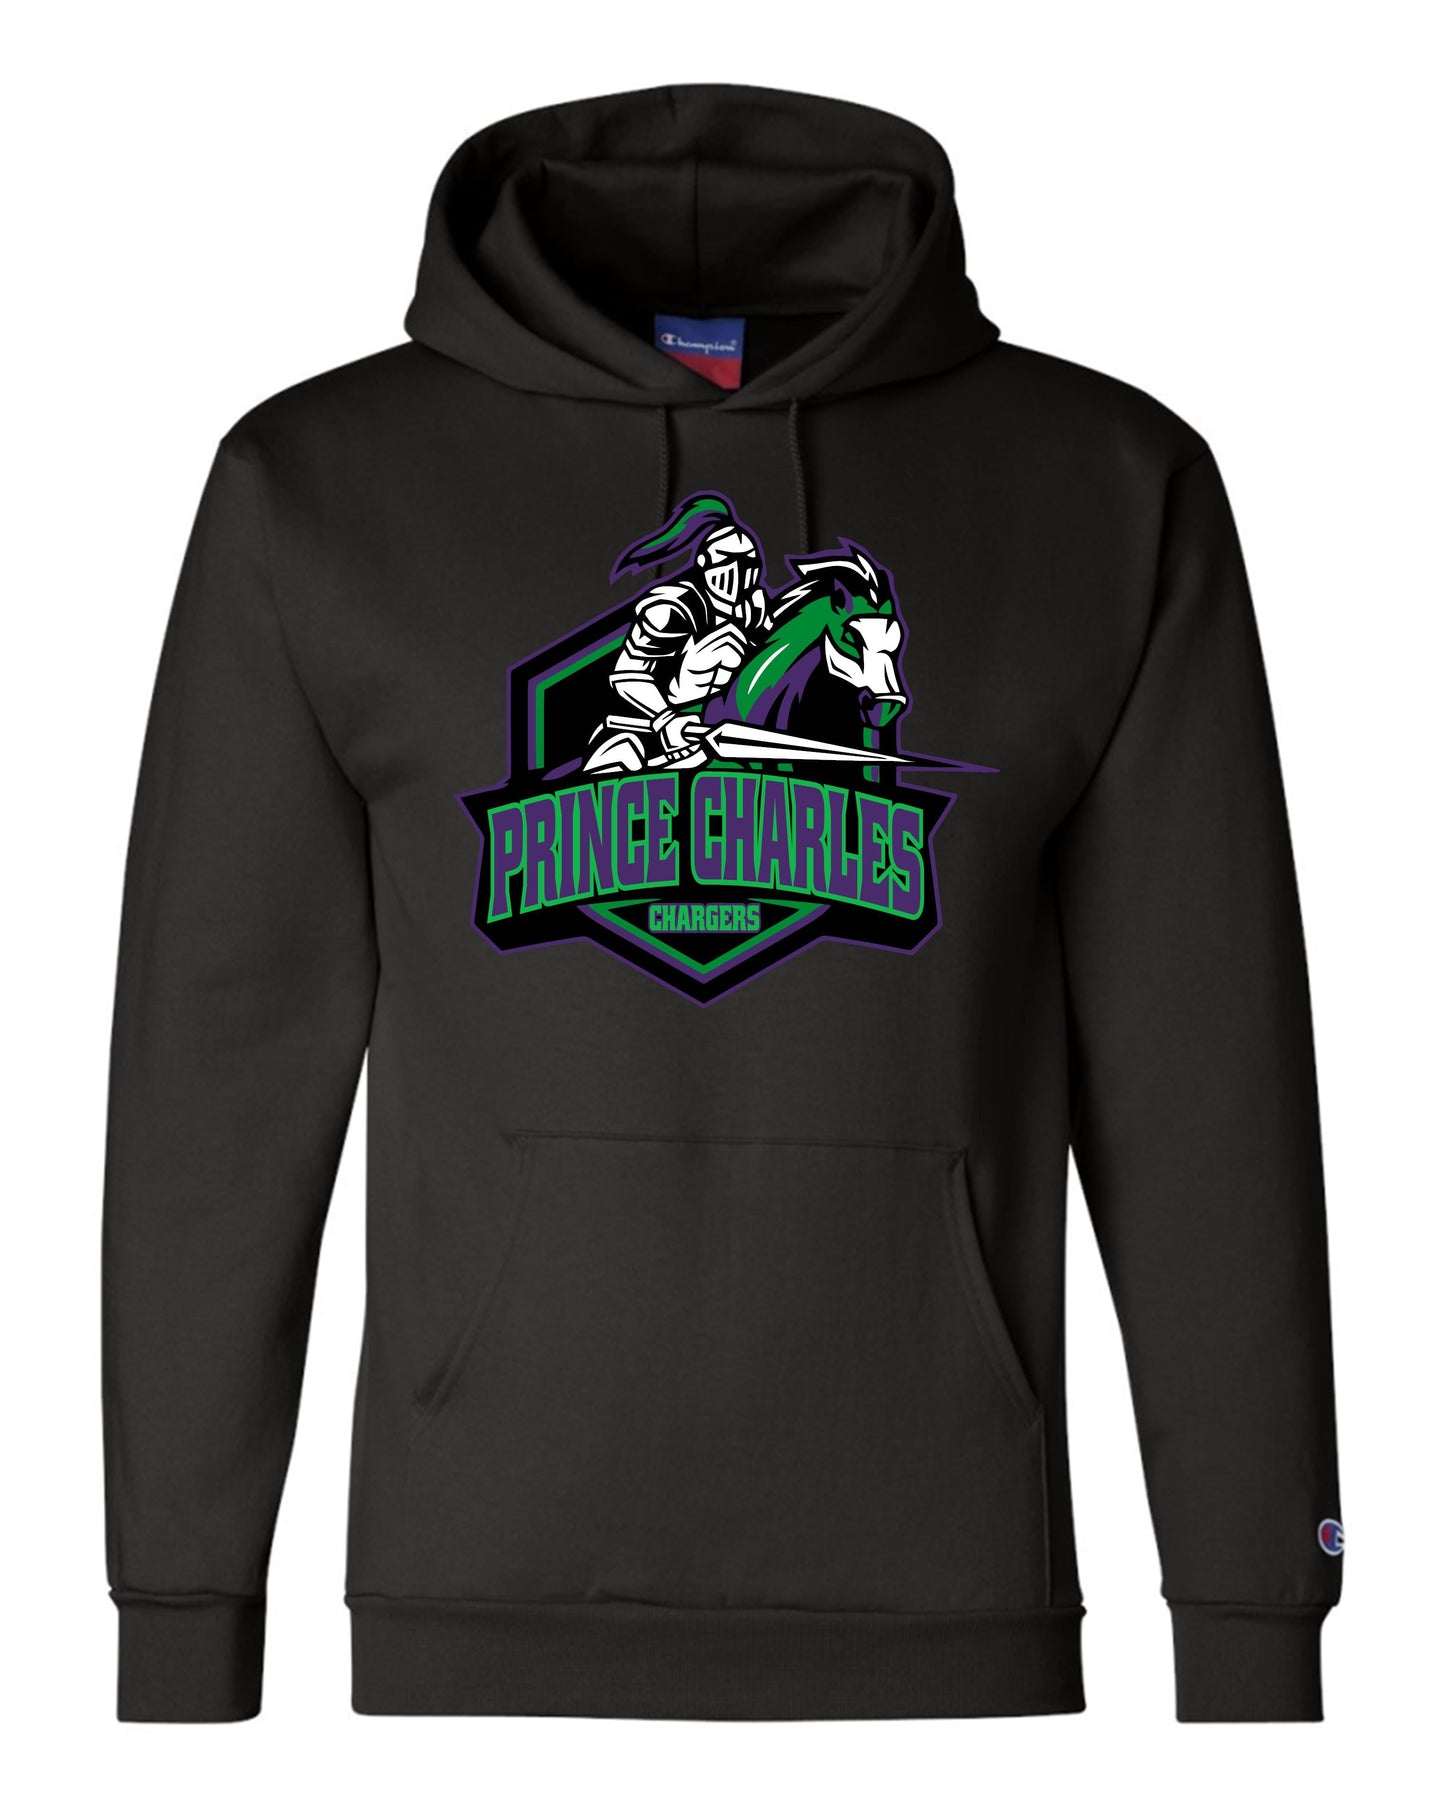 Prince Charles Chargers Champion Youth Hoodie